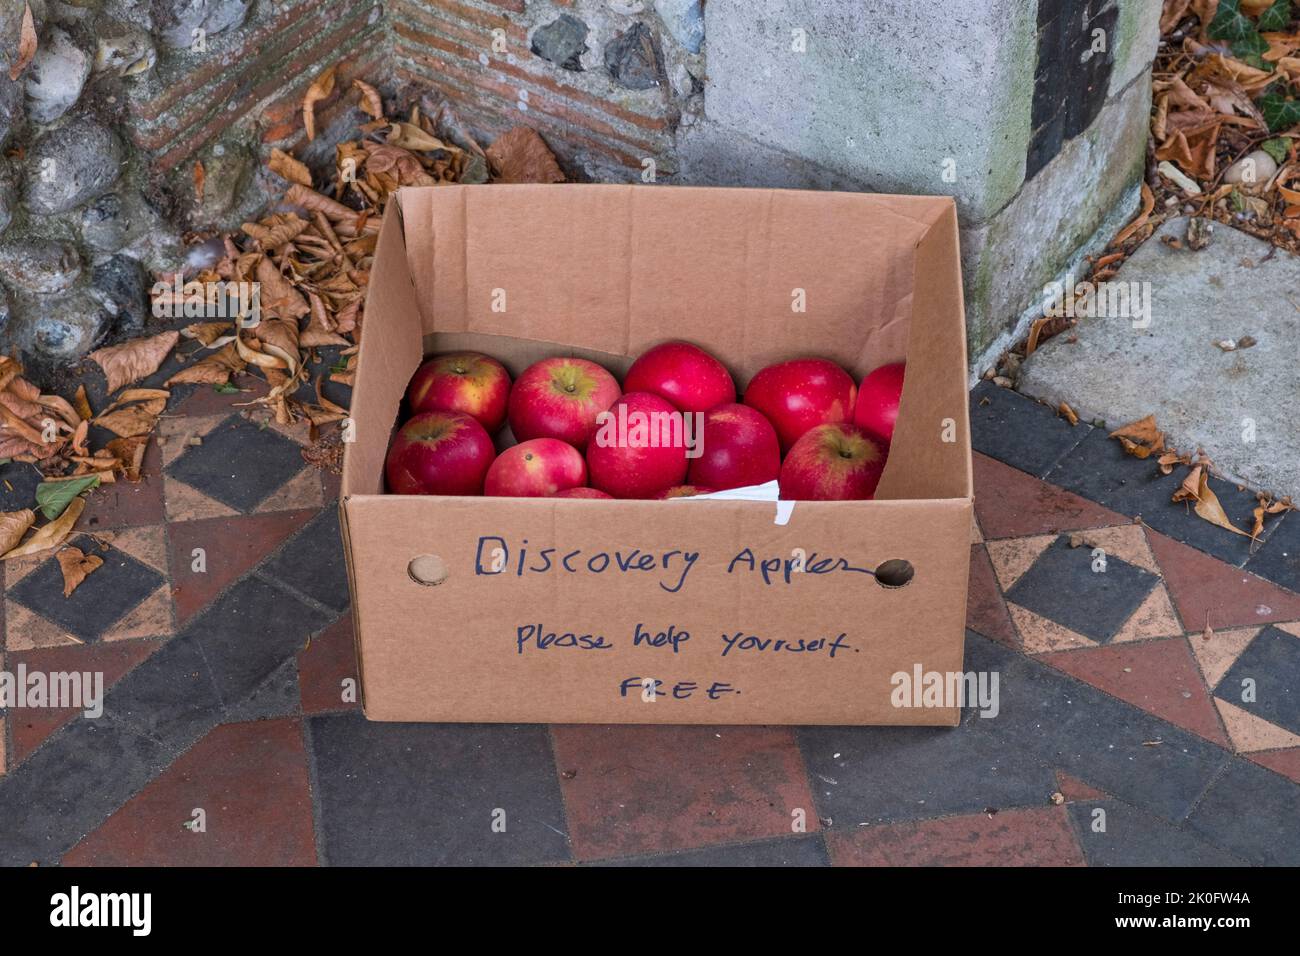 'Please help yourself, free' discovery apples. Suffolk, UK. Stock Photo